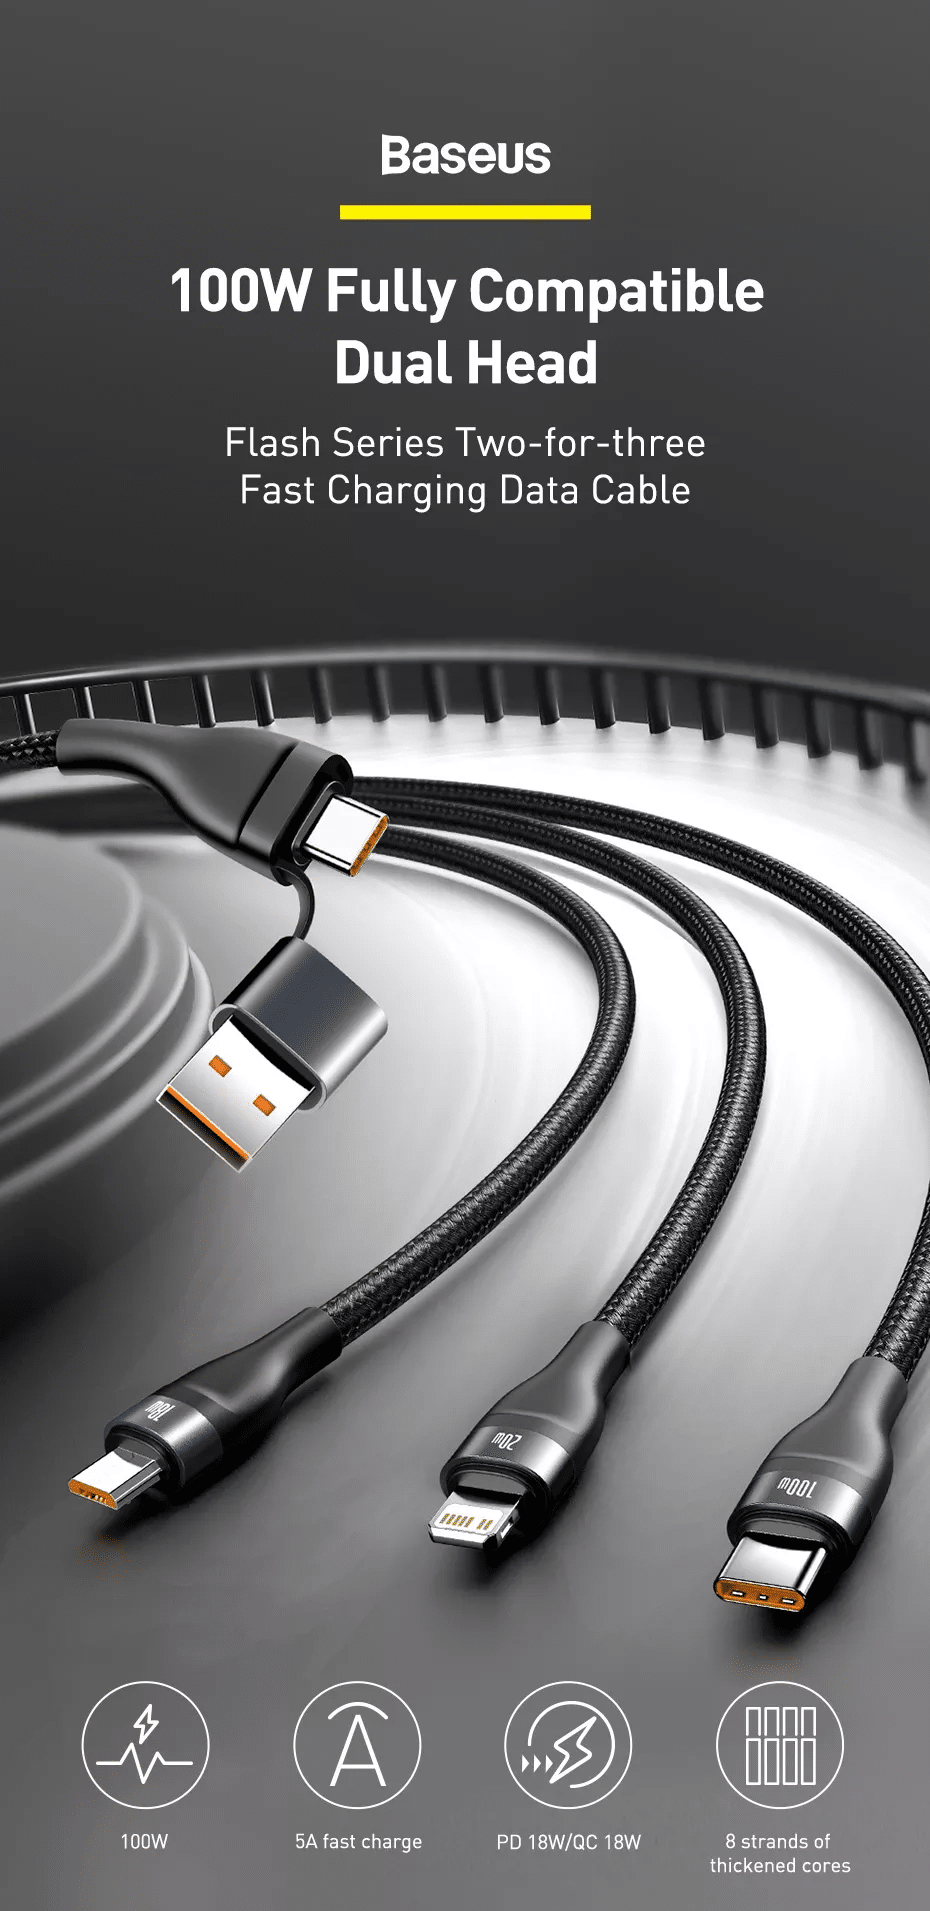 Baseus Flash Series Two for three Fast Charging 100W Data Cable 1 1